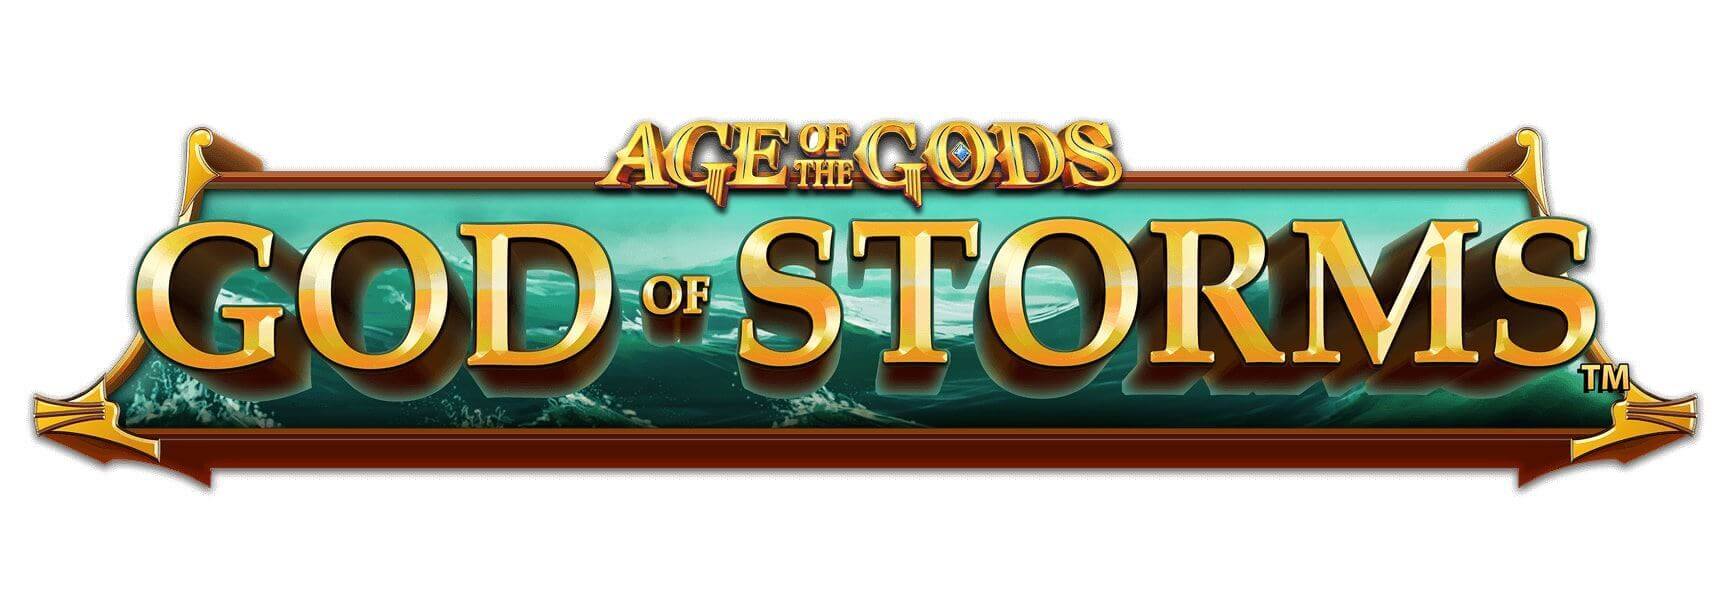 Age of the Gods, God of Storms logo